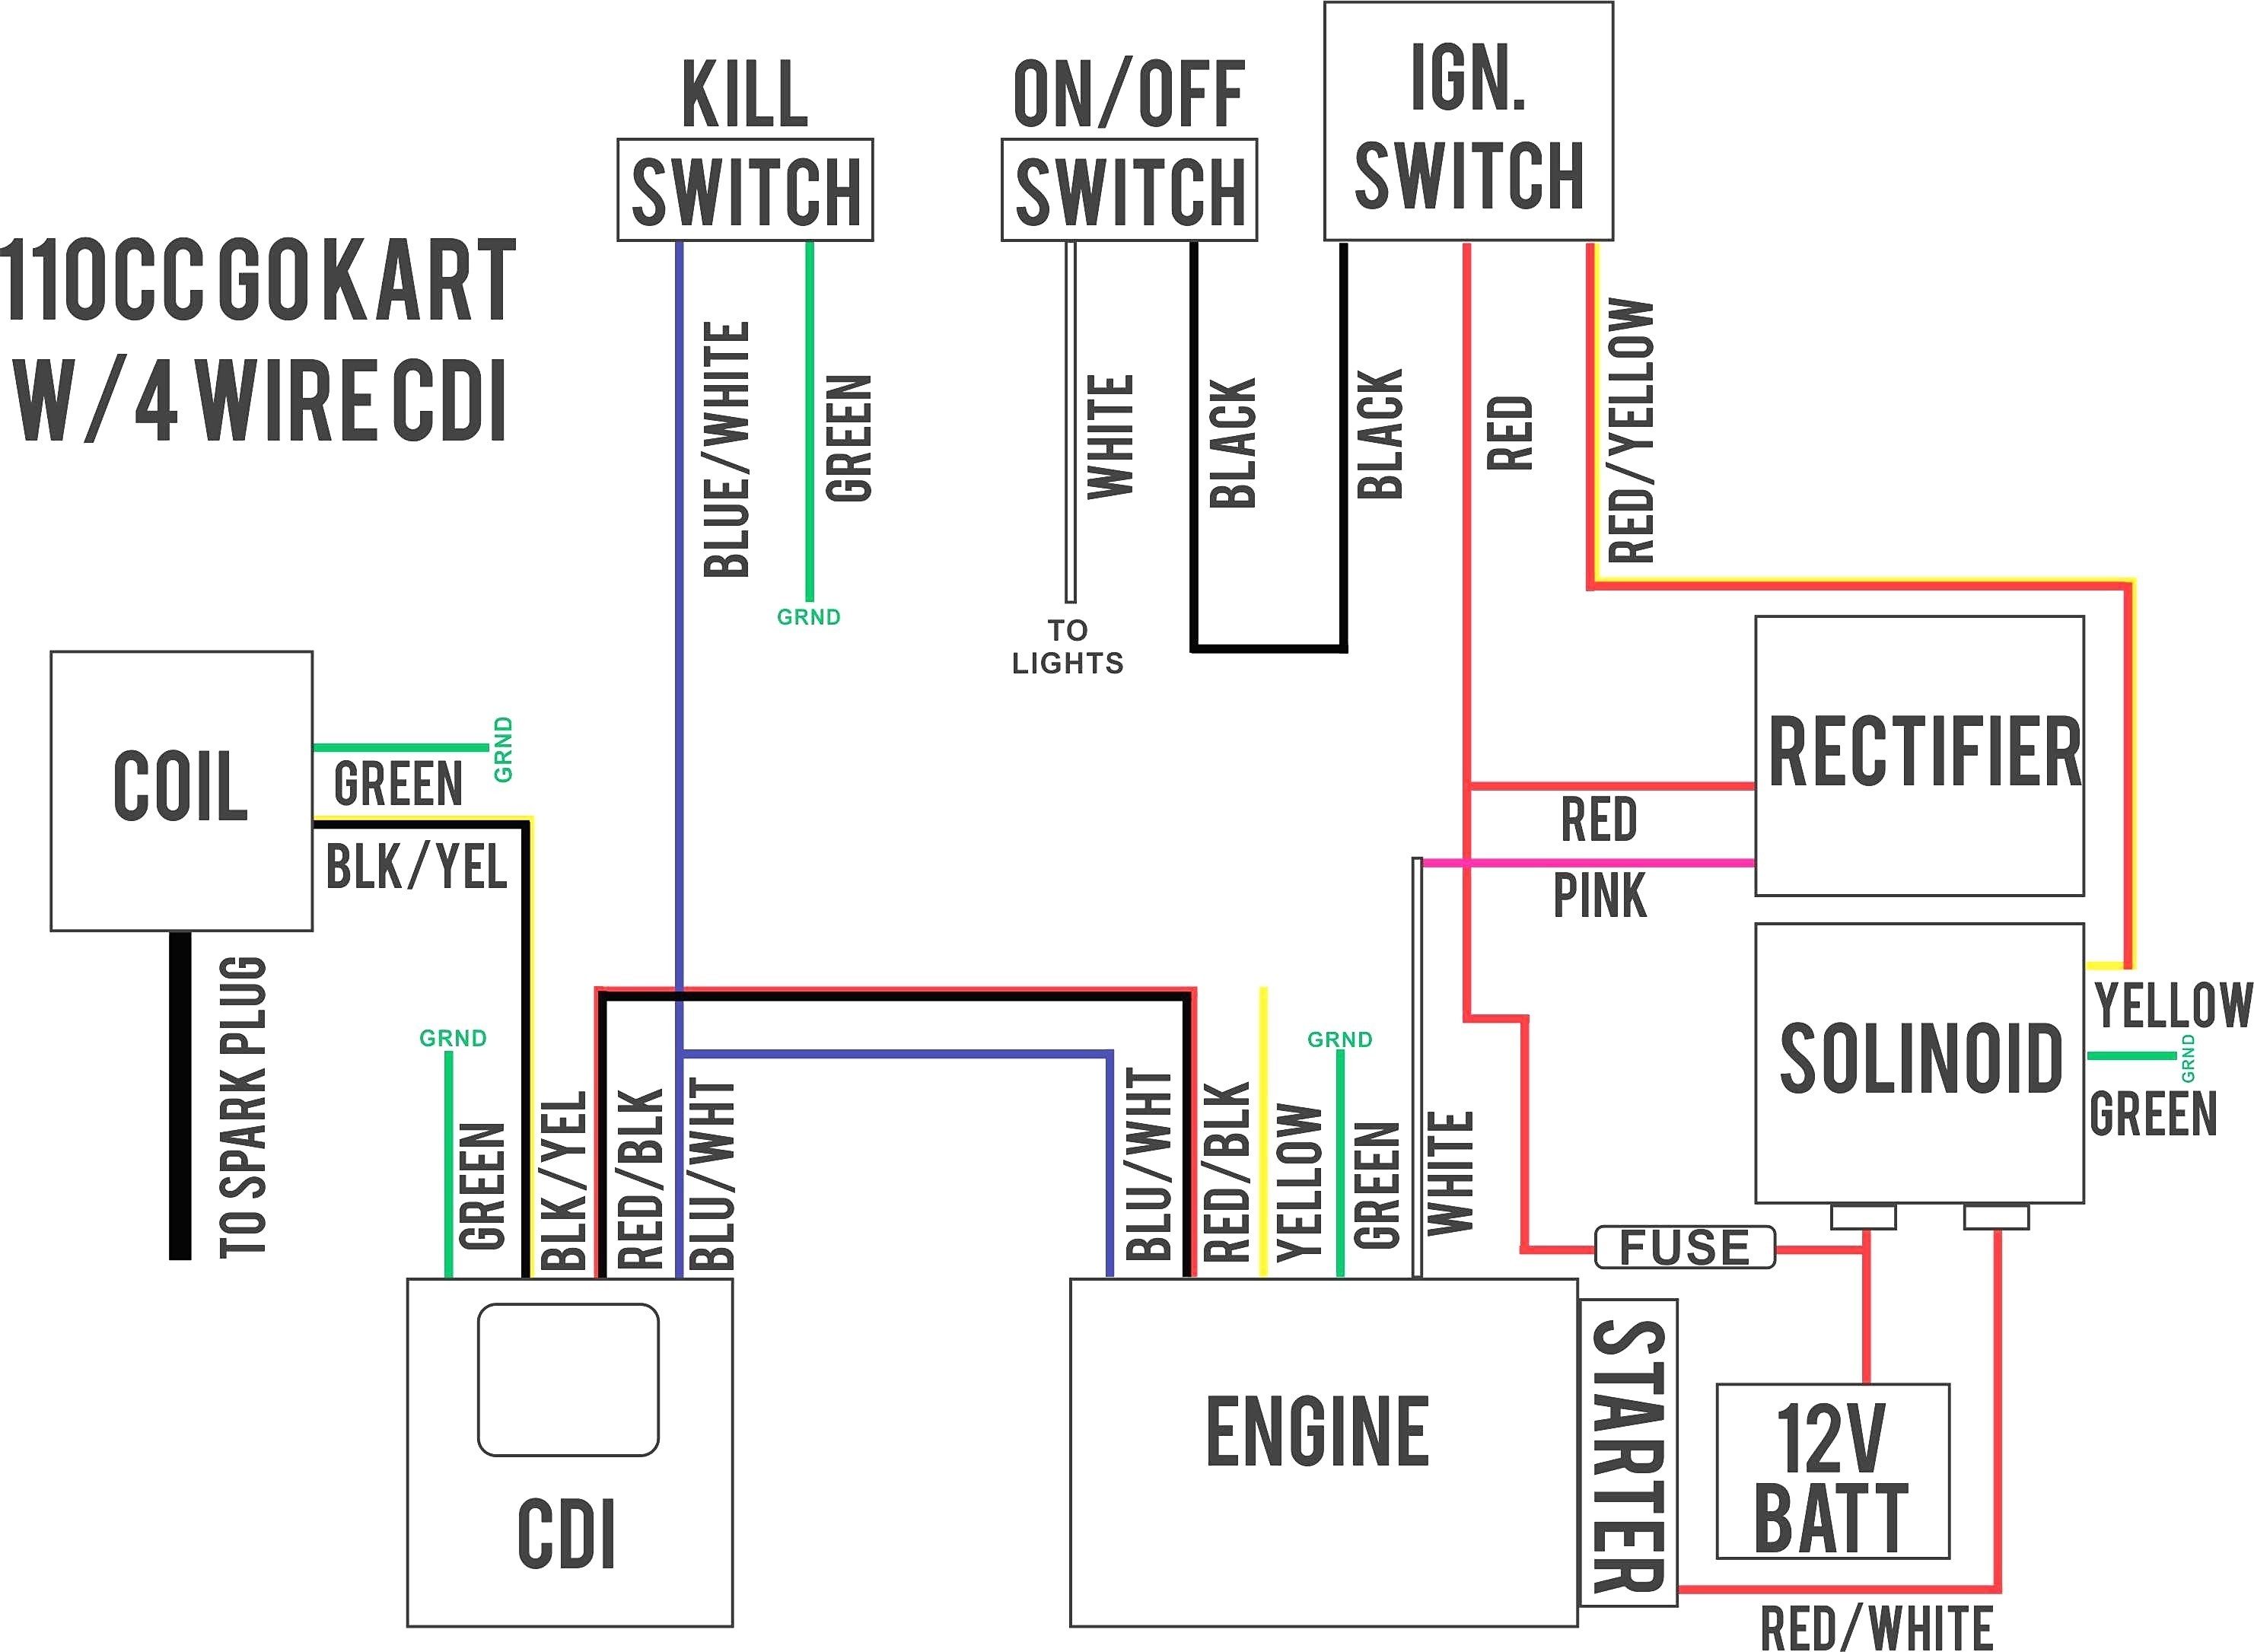 Db15 Monitor Wiring Schematic Wiring Diagram Sys Db15 Monitor Wiring Schematic